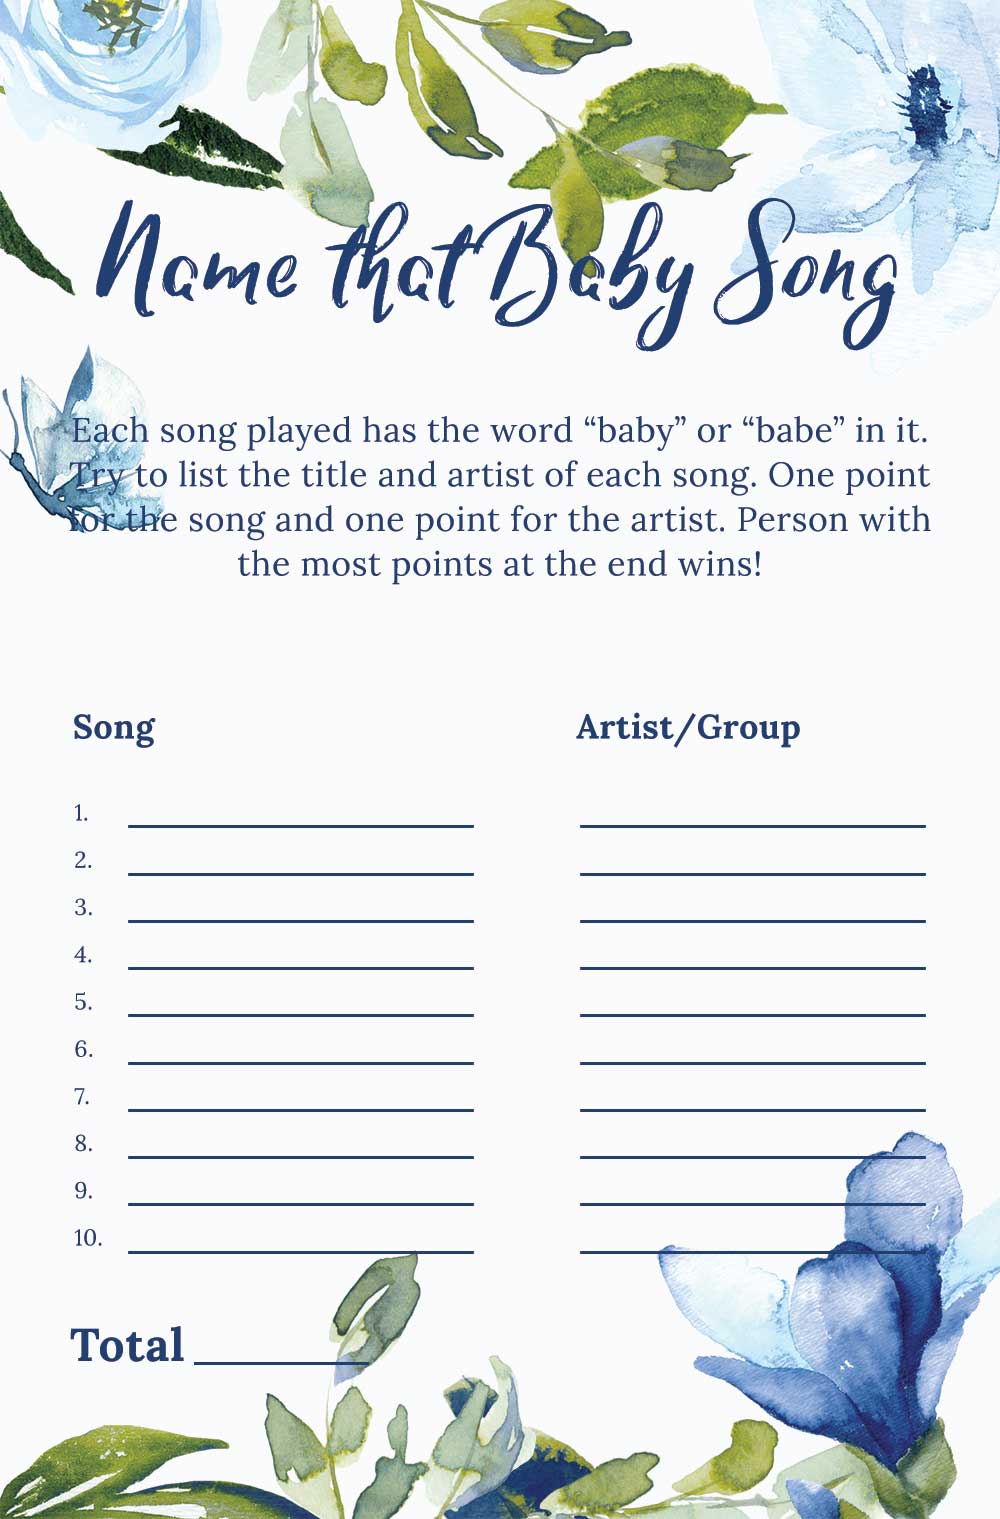 Name that baby song game - Sky Theme